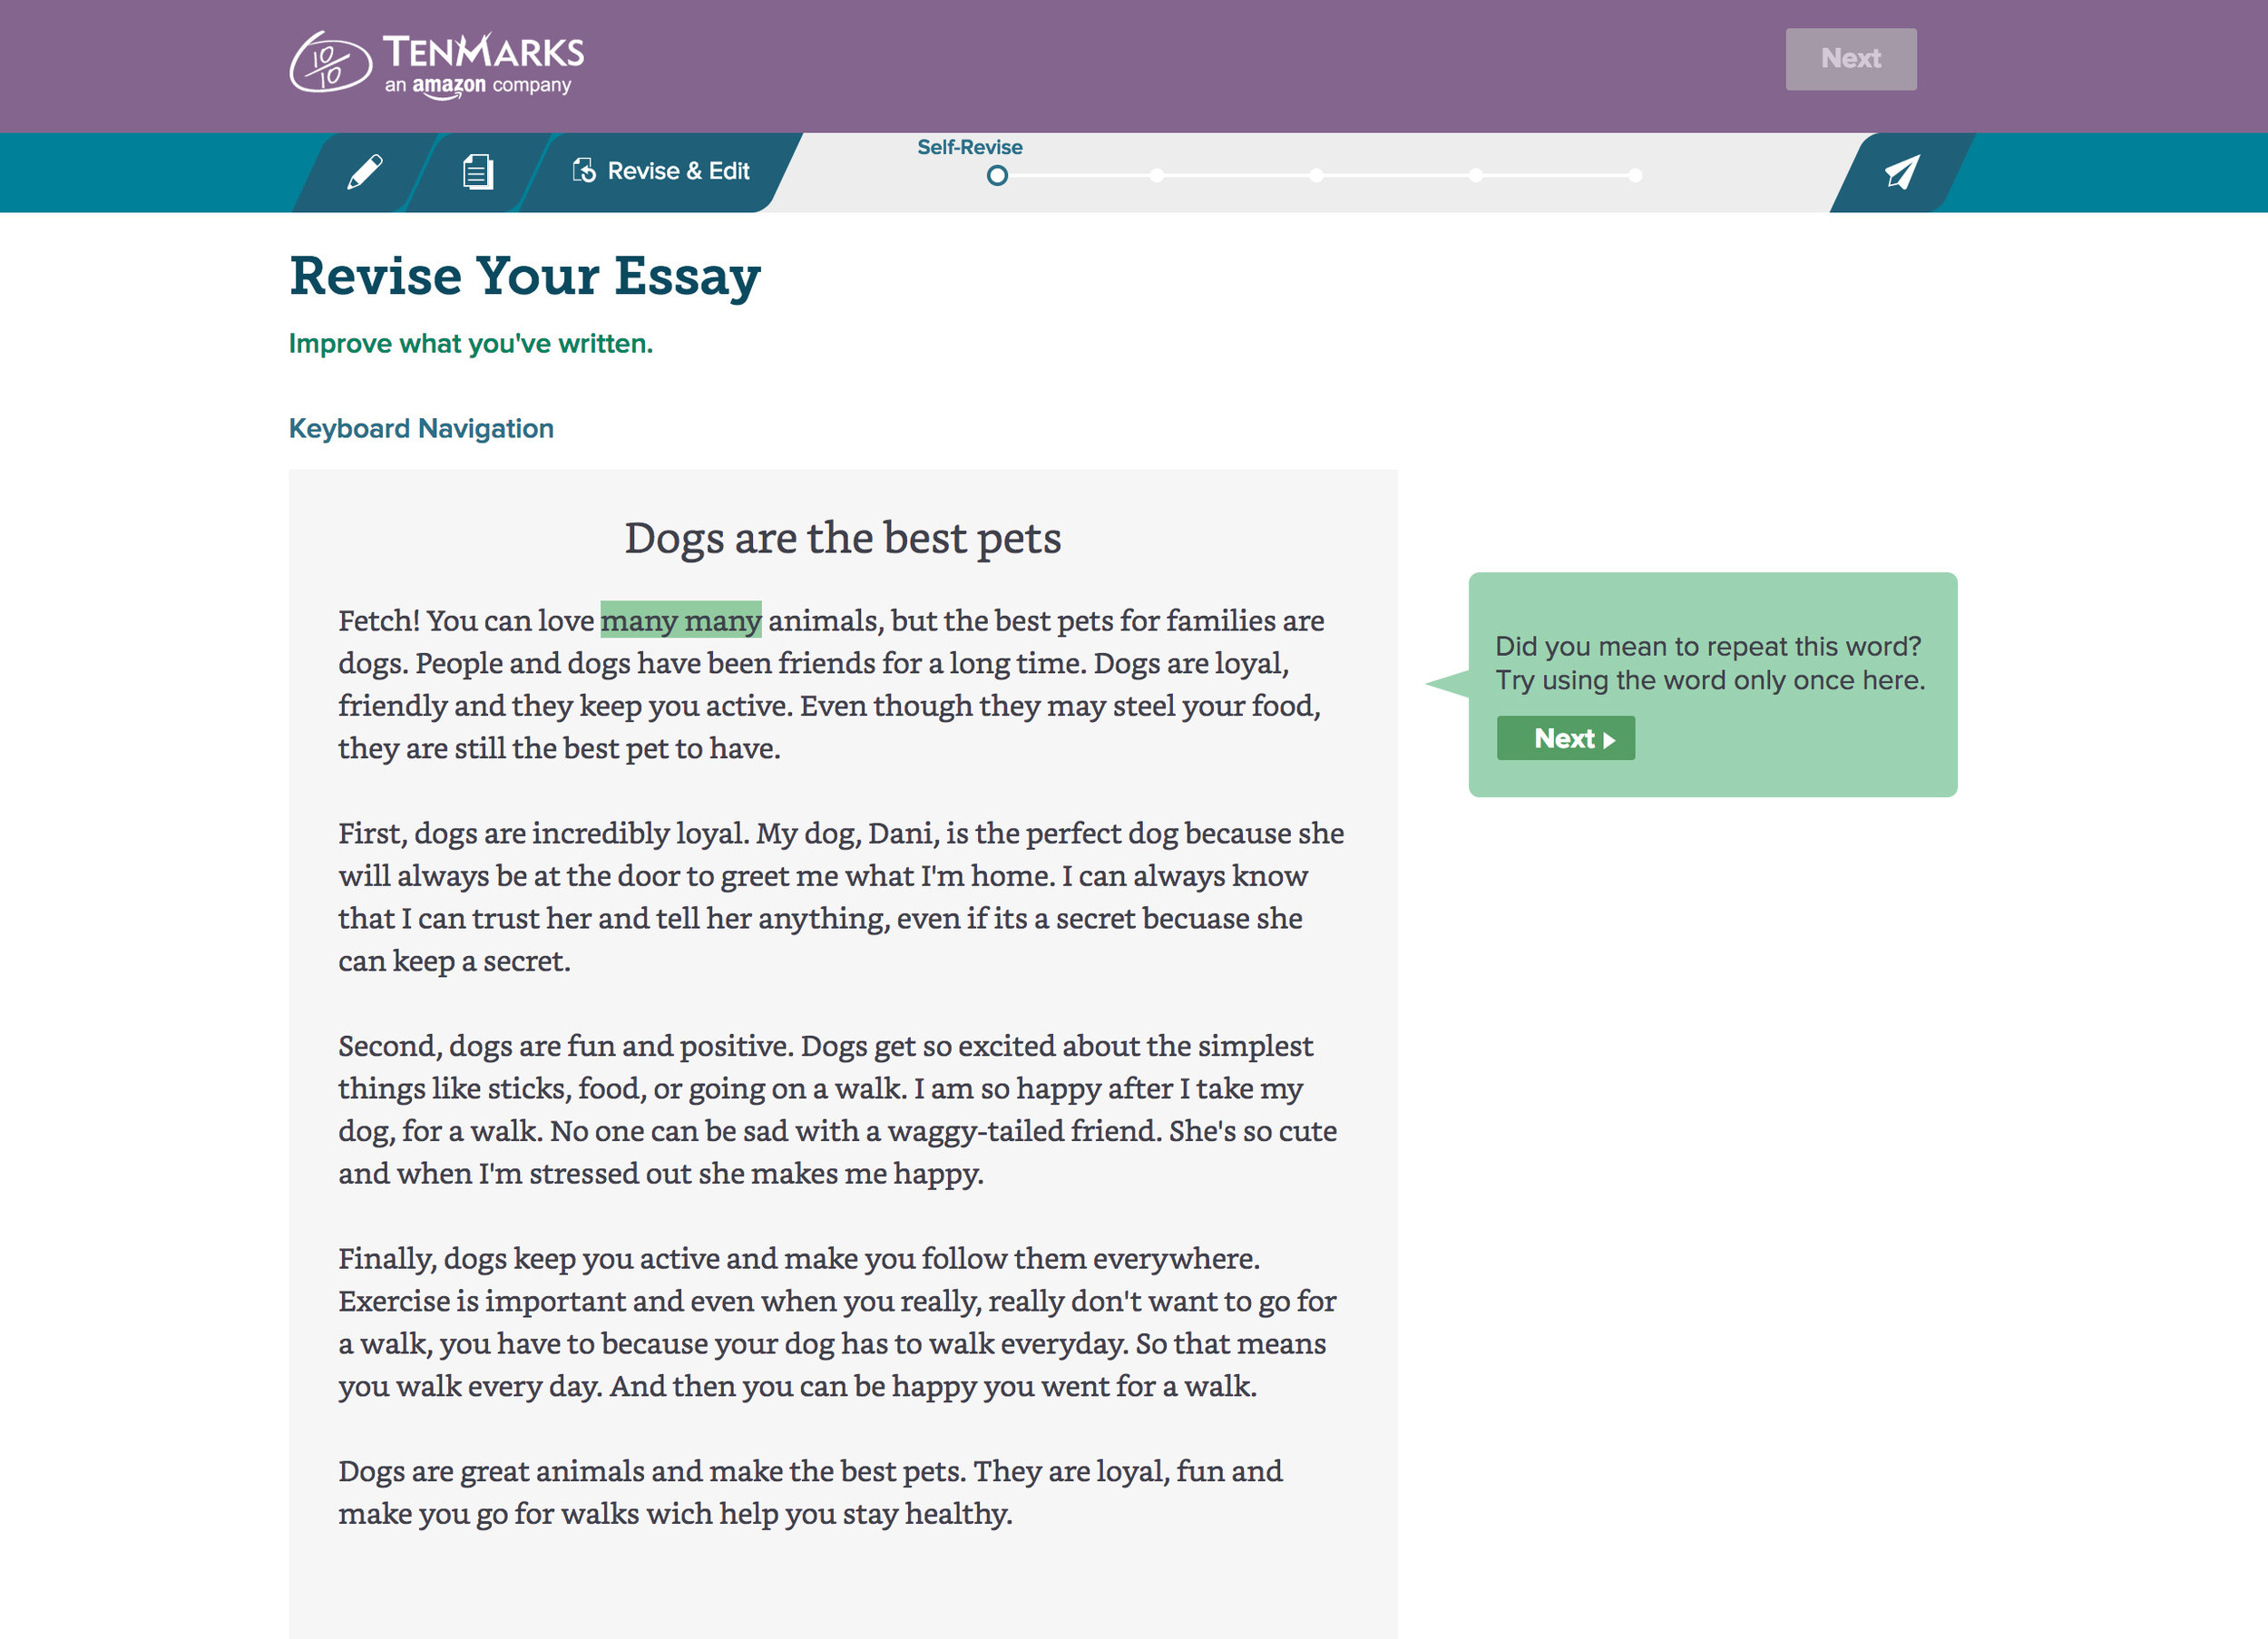 Amazon launches tool to help students improve their writing